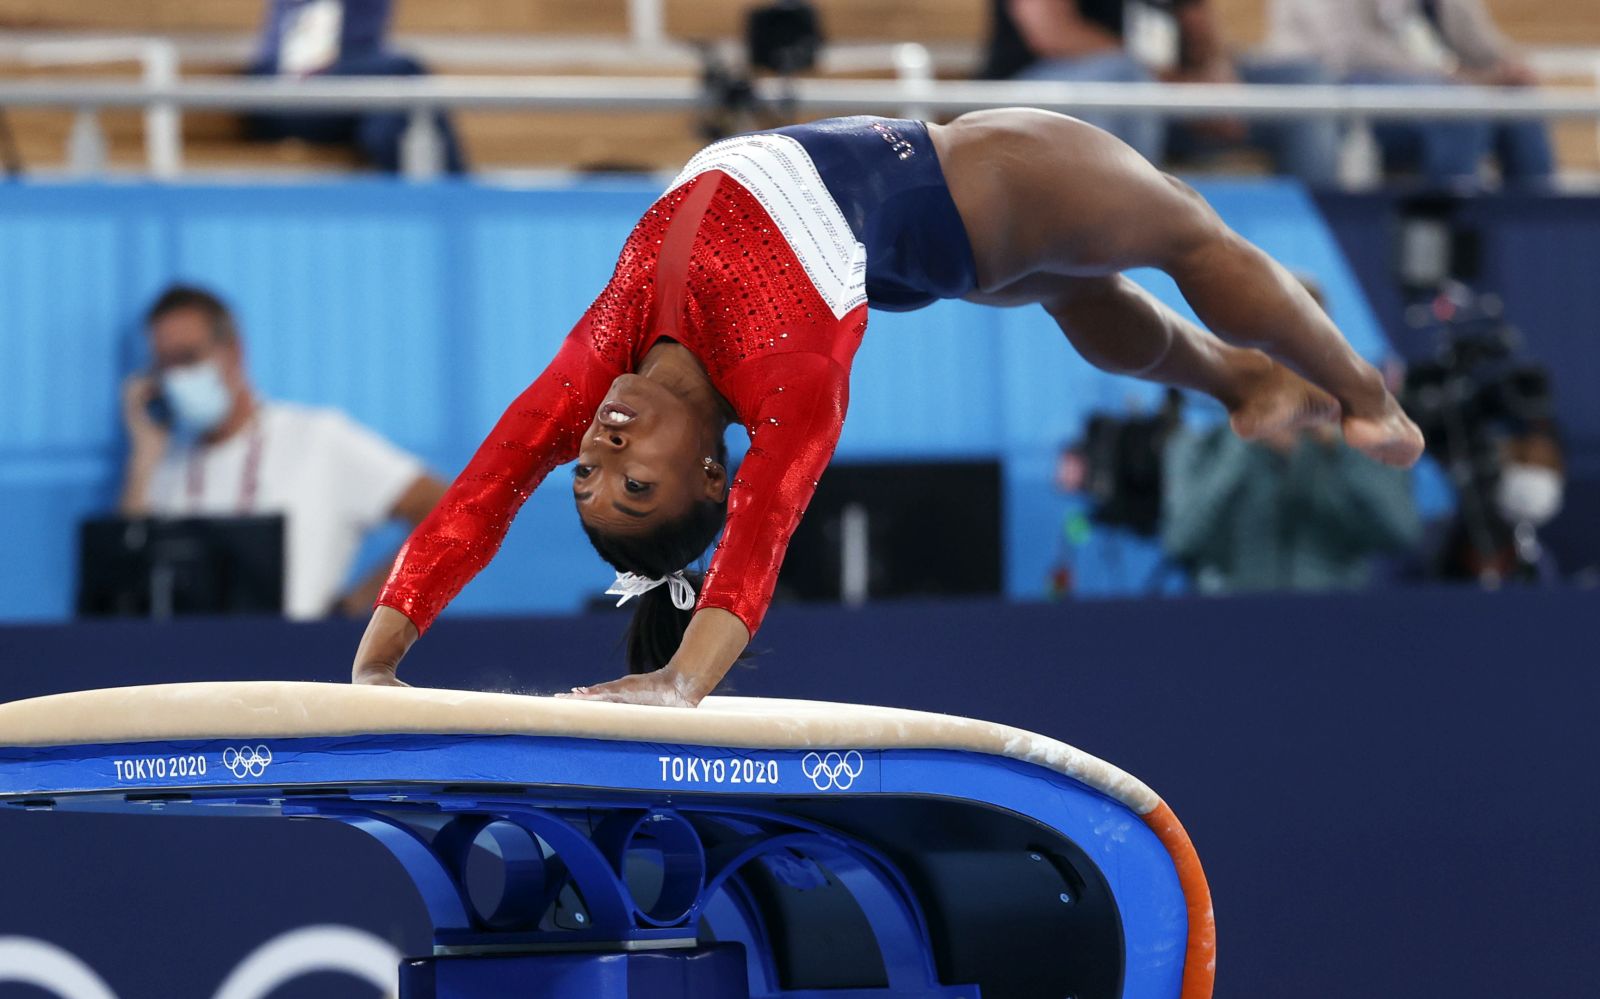 epa09370180 Simone Biles of the USA performs on the Vault during the Women's Team final during the Artistic Gymnastics events of the Tokyo 2020 Olympic Games at the Ariake Gymnastics Centre in Tokyo, Japan, 27 July 2021.  EPA/HOW HWEE YOUNG